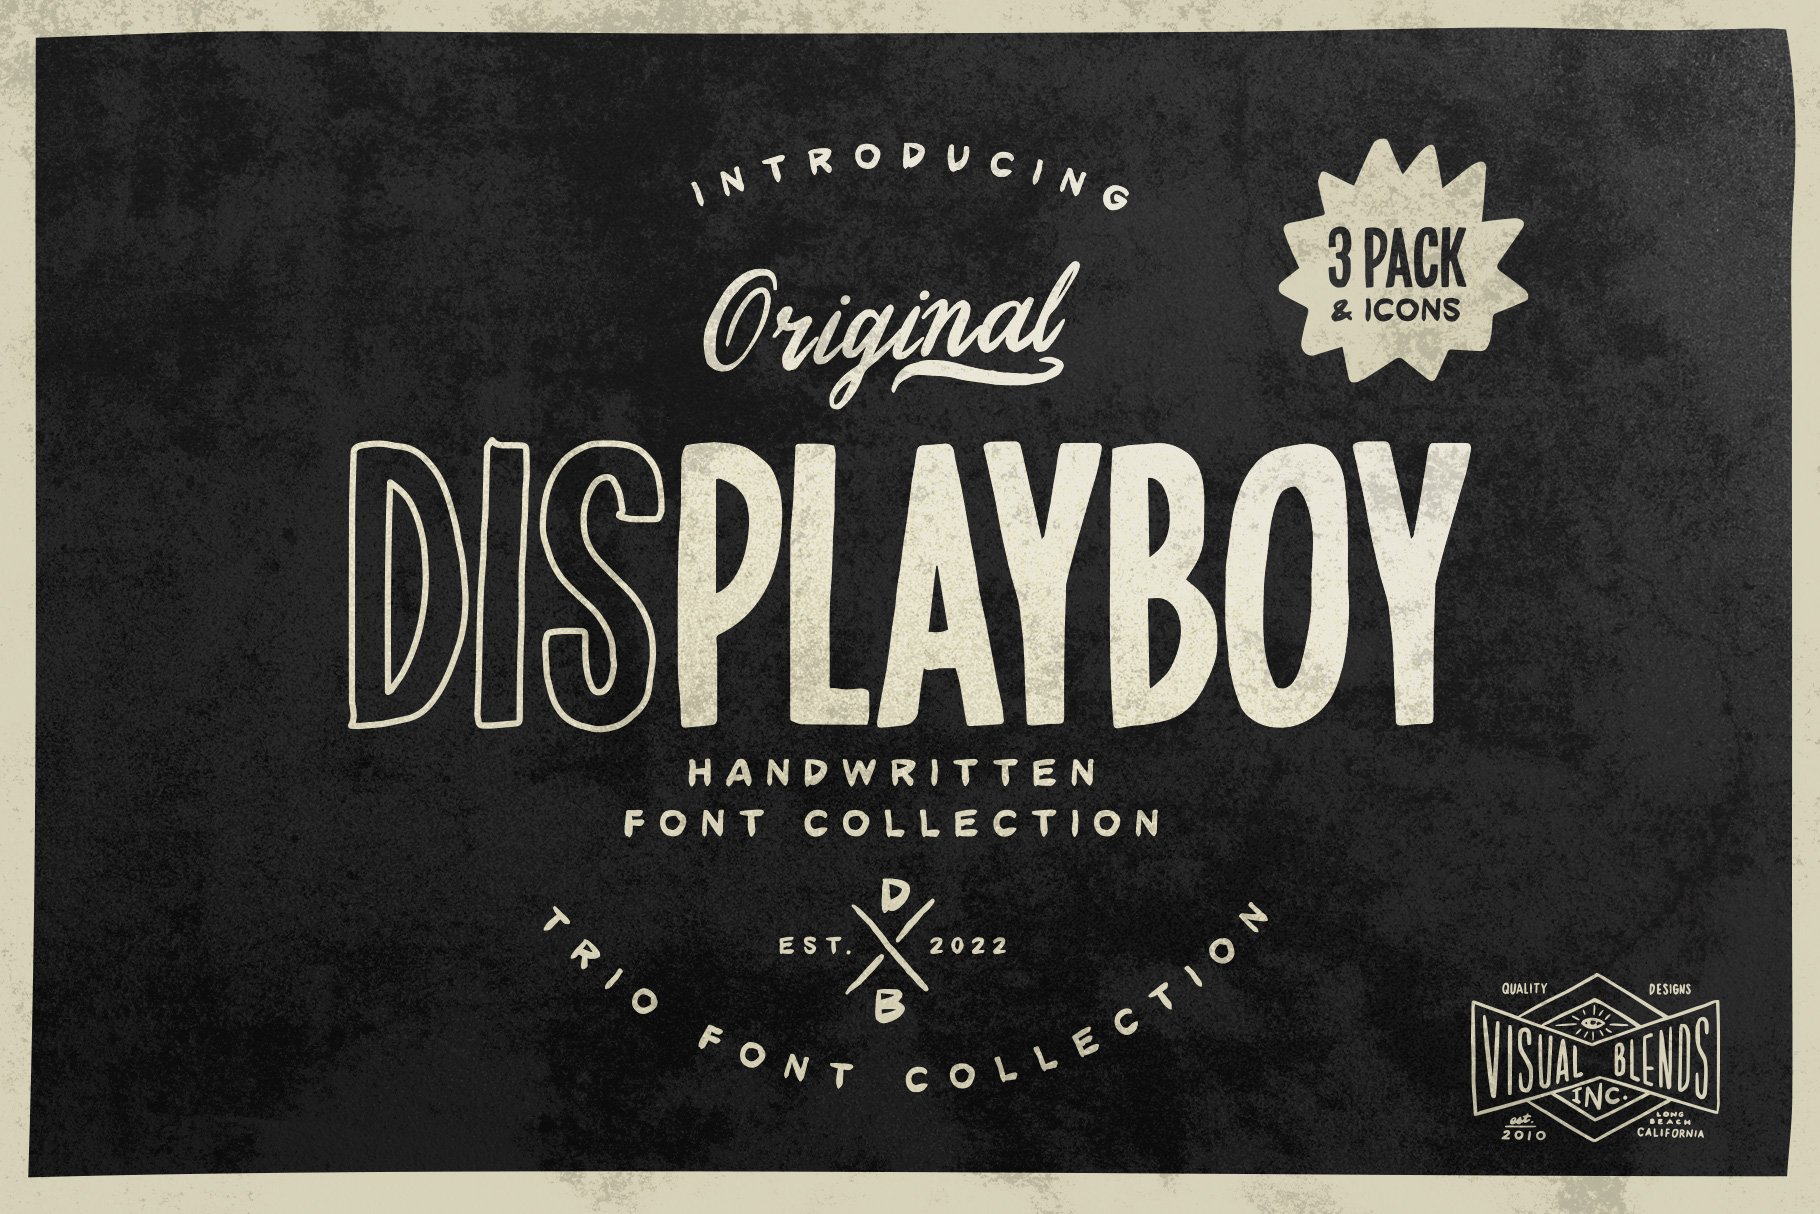 Displayboy Font Collection cover image.